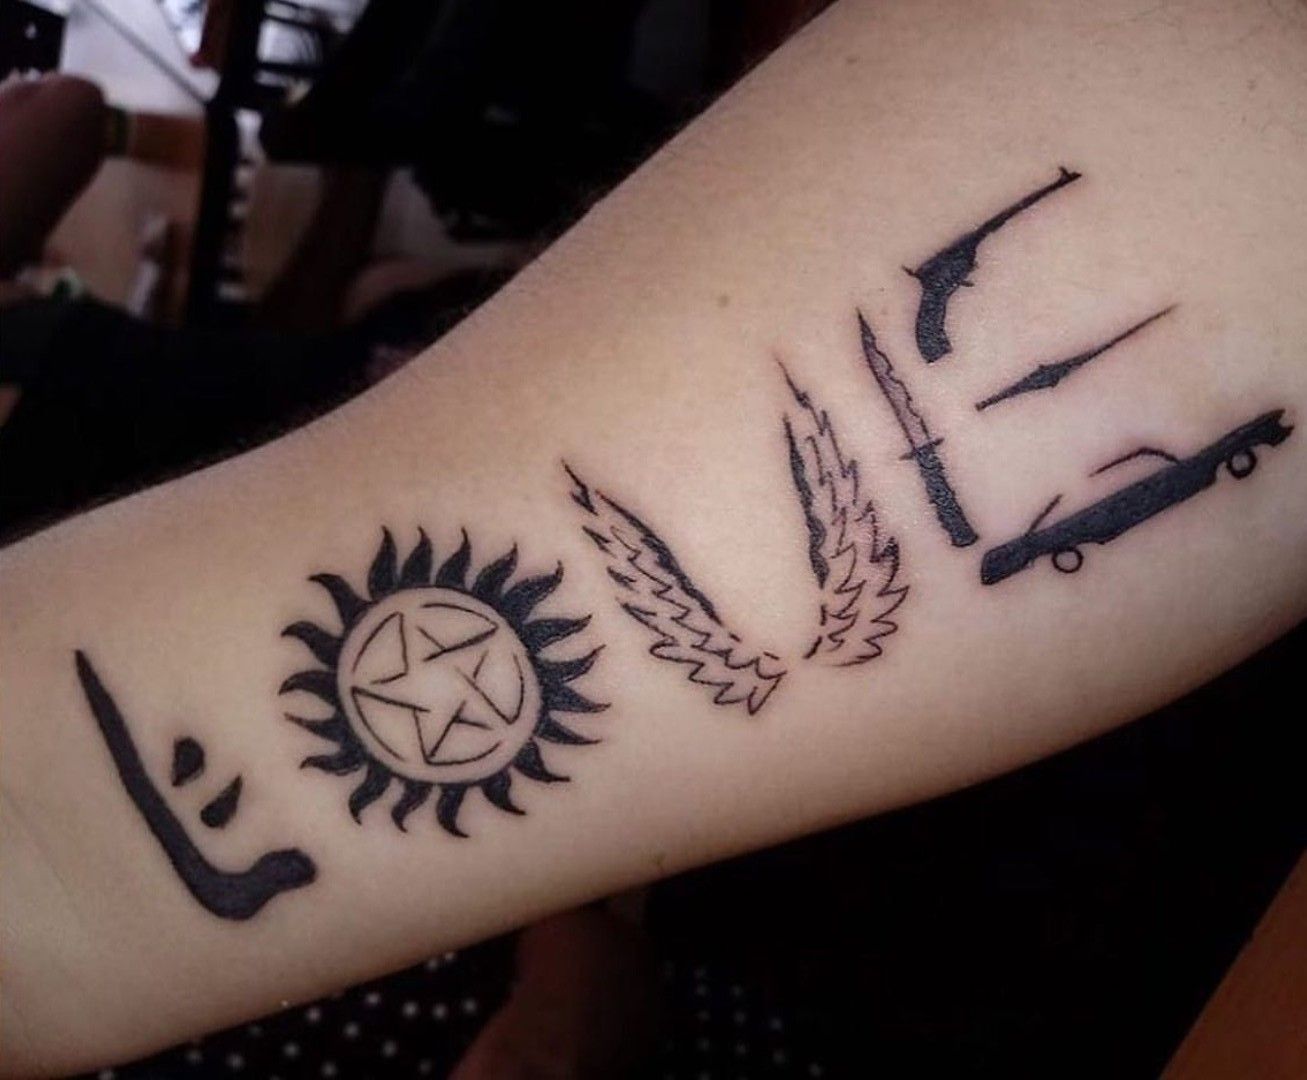 10 Supernatural Fan Tattoos You Need To Consider Before The Show Ends -  